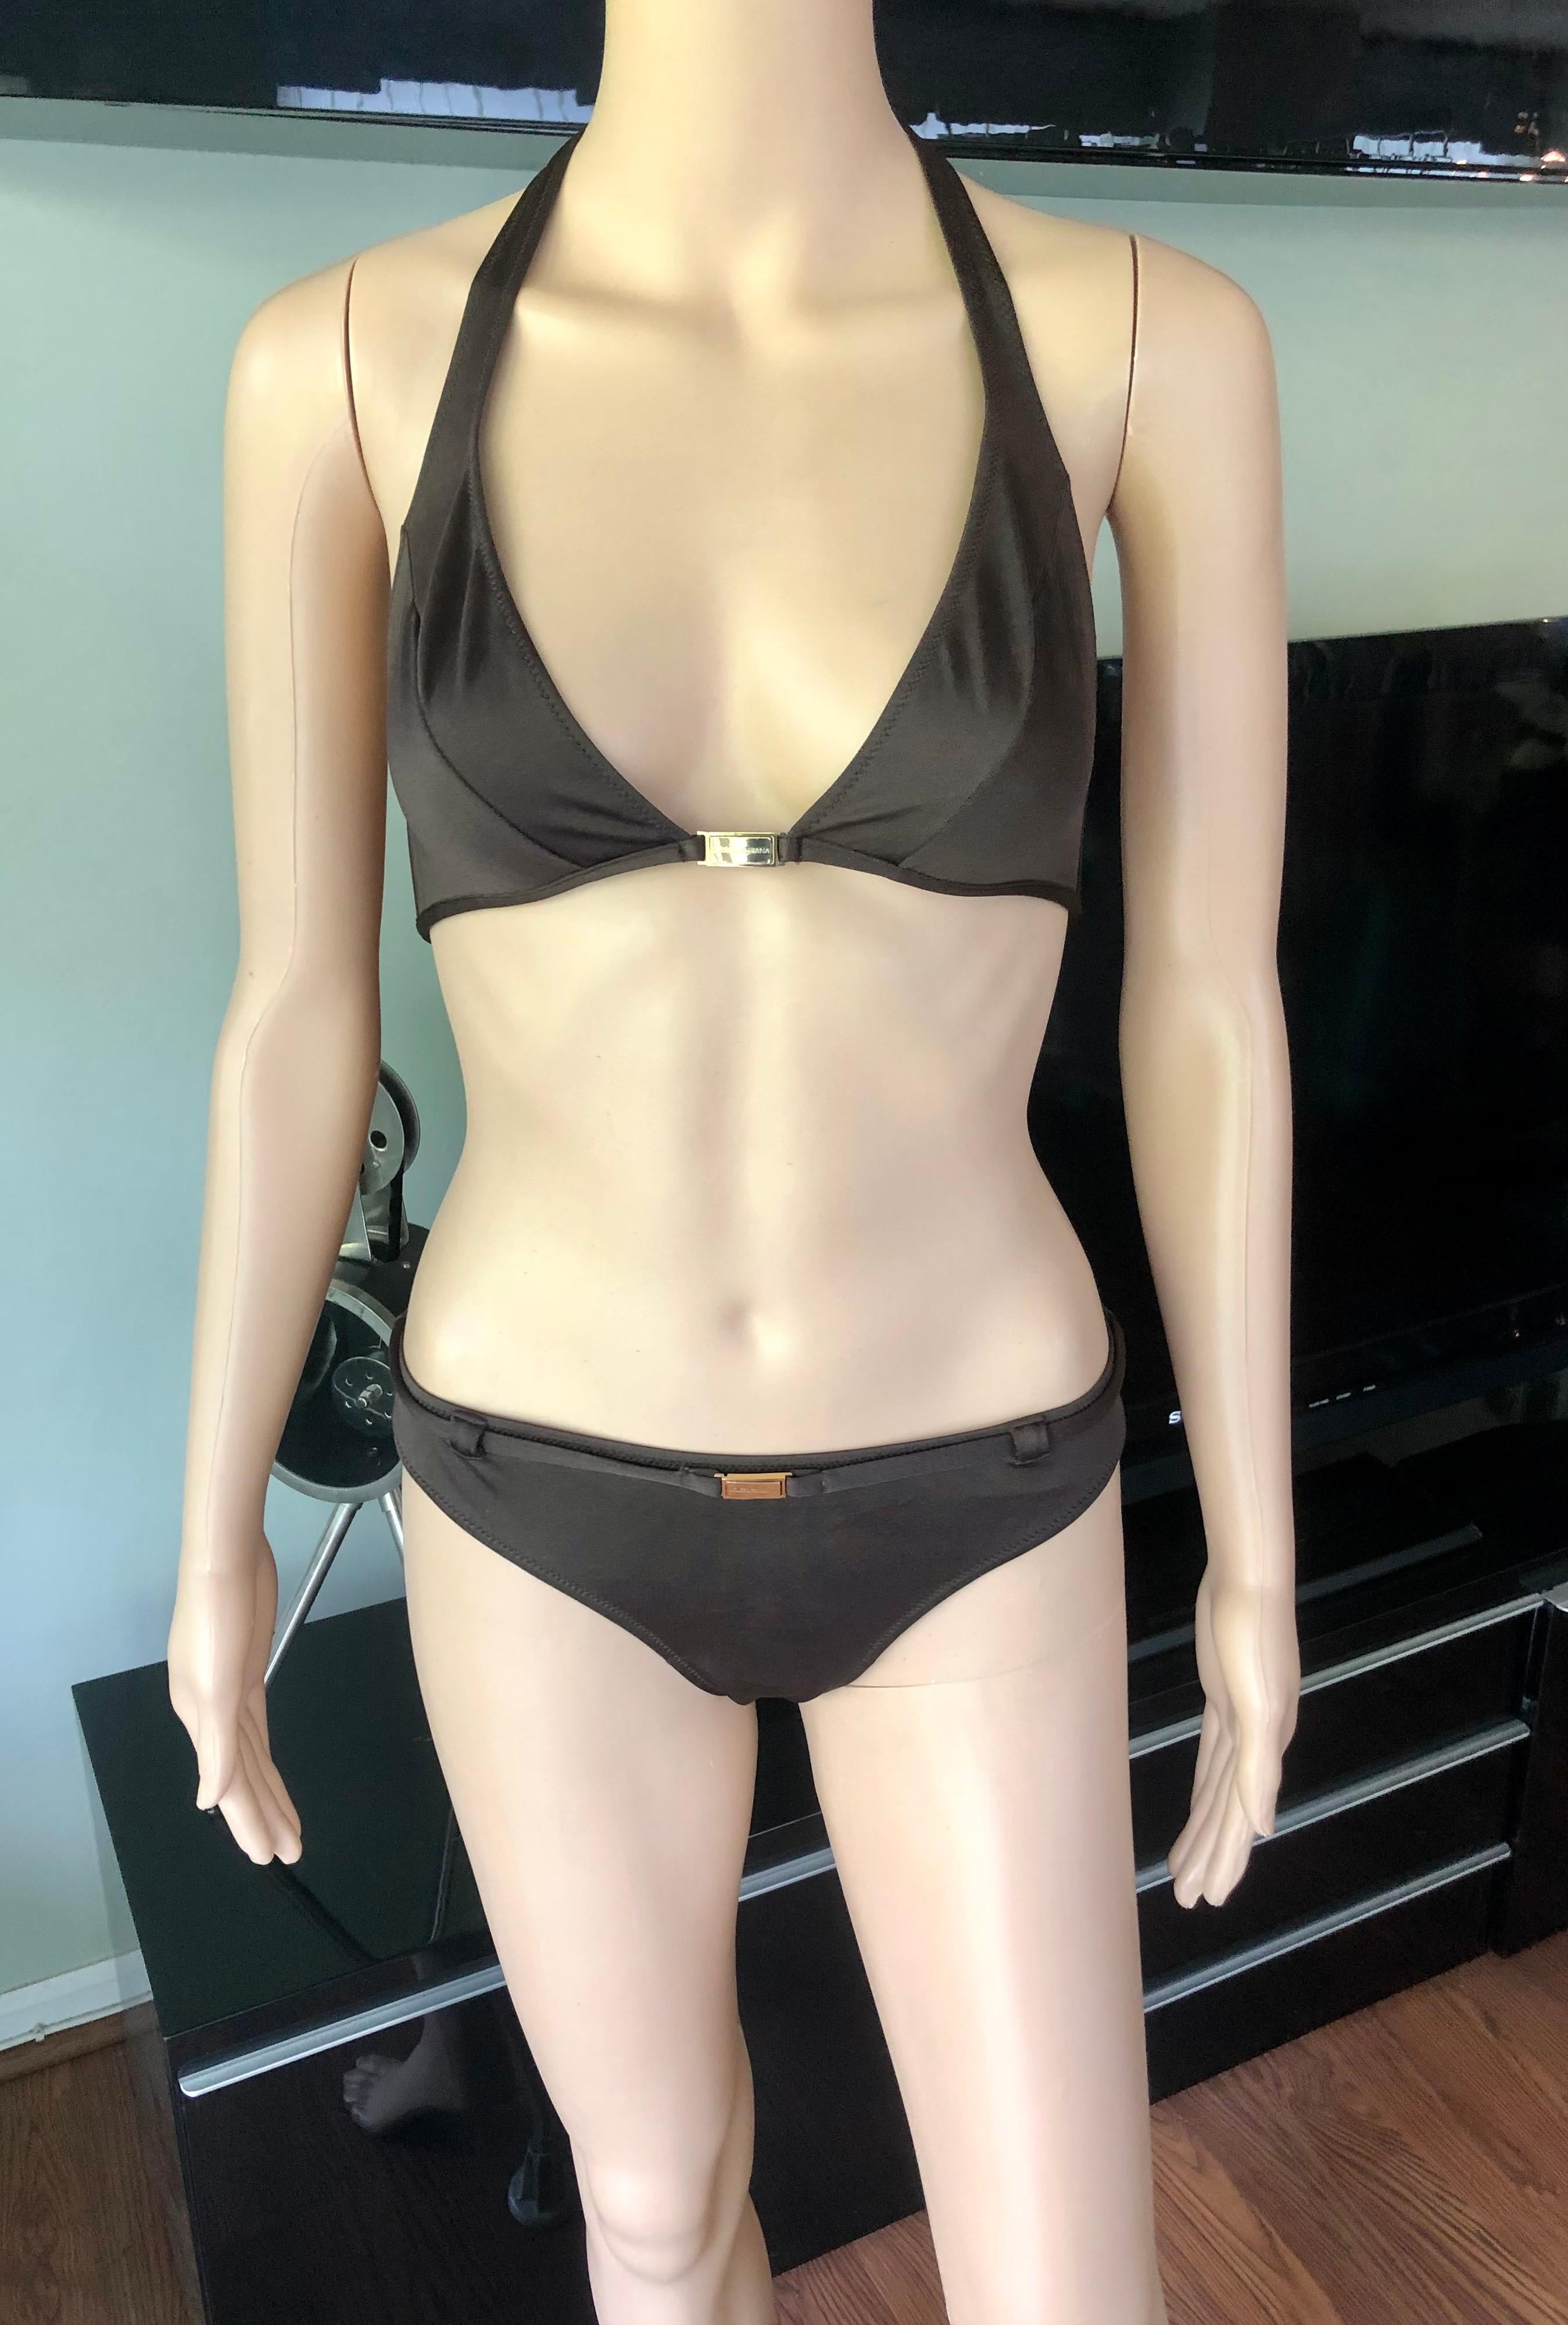 Dolce & Gabbana Logo Embellished Belted Brown Bikini Swimwear Swimsuit 2 Piece

Please note size tag has been removed but it will fit size Small.